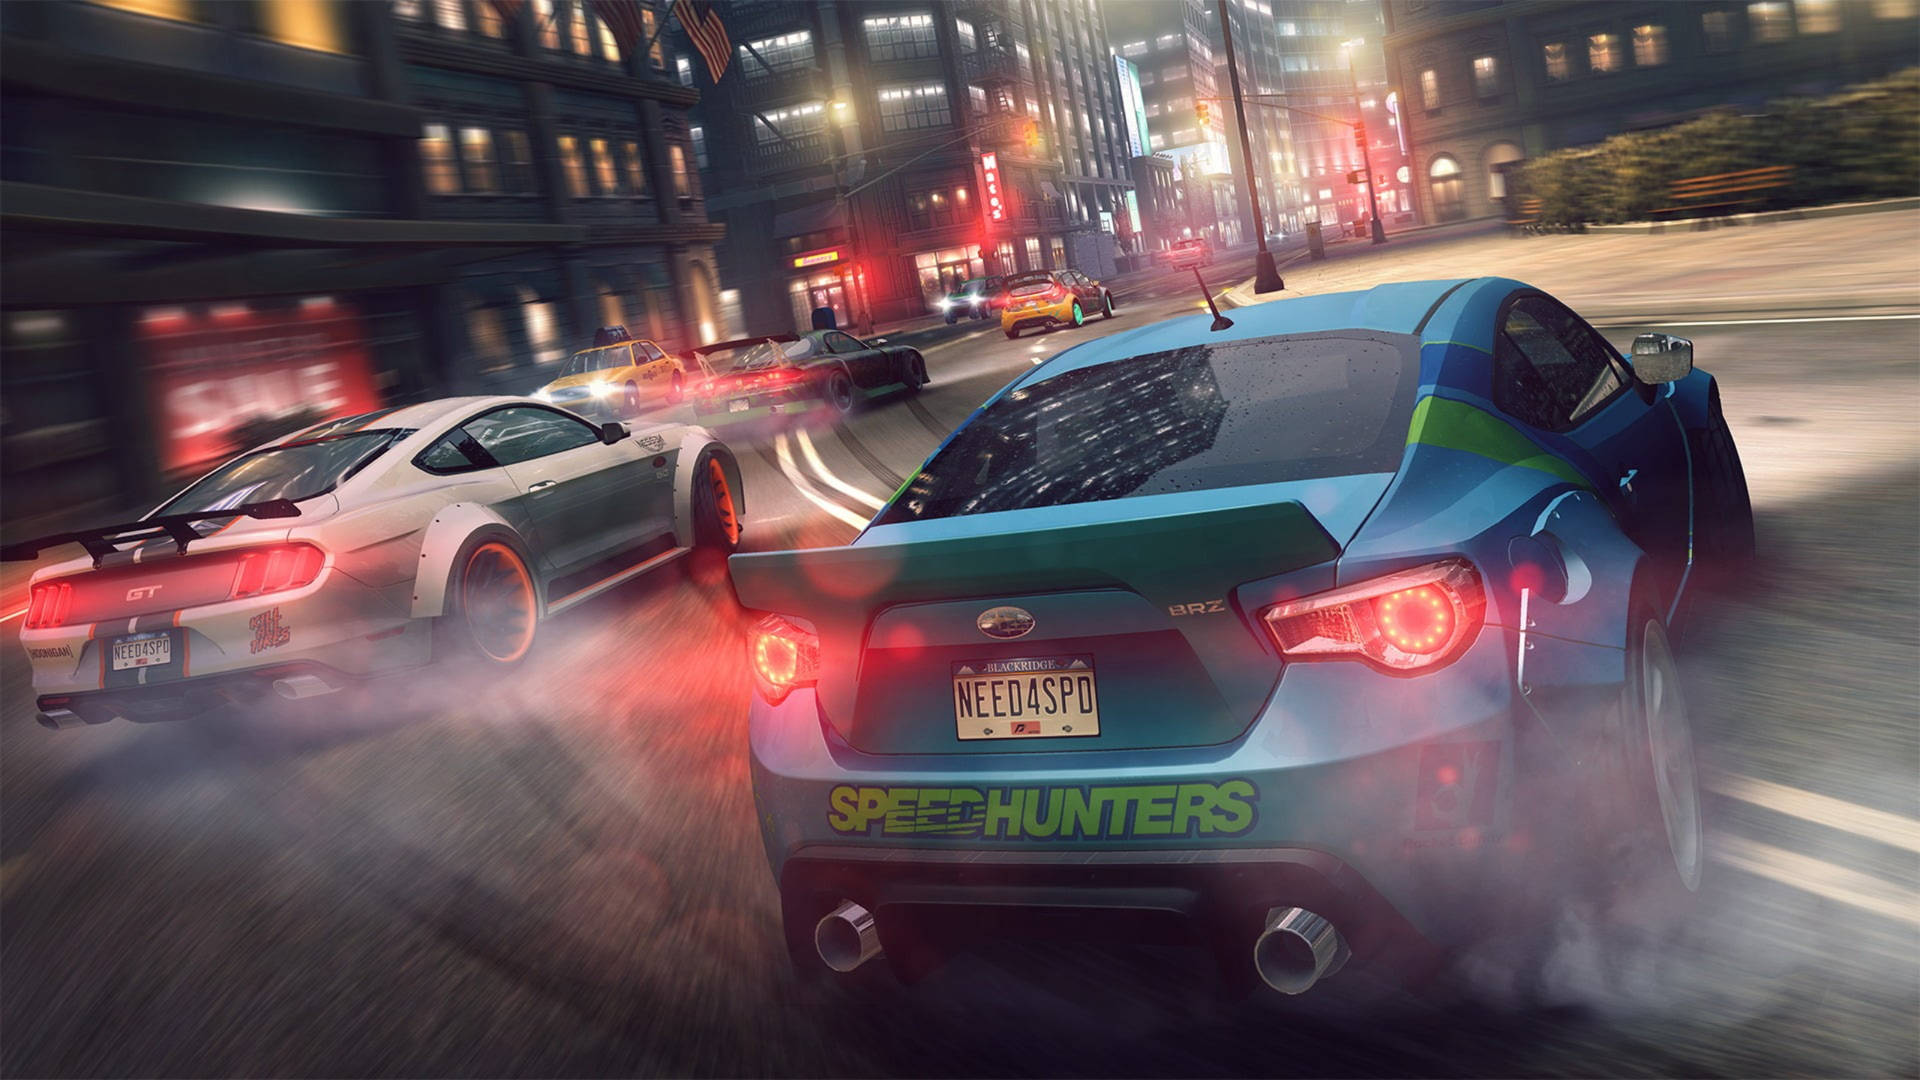 High-speed Thrills - Exhilarating Need For Speed Game Racing Car